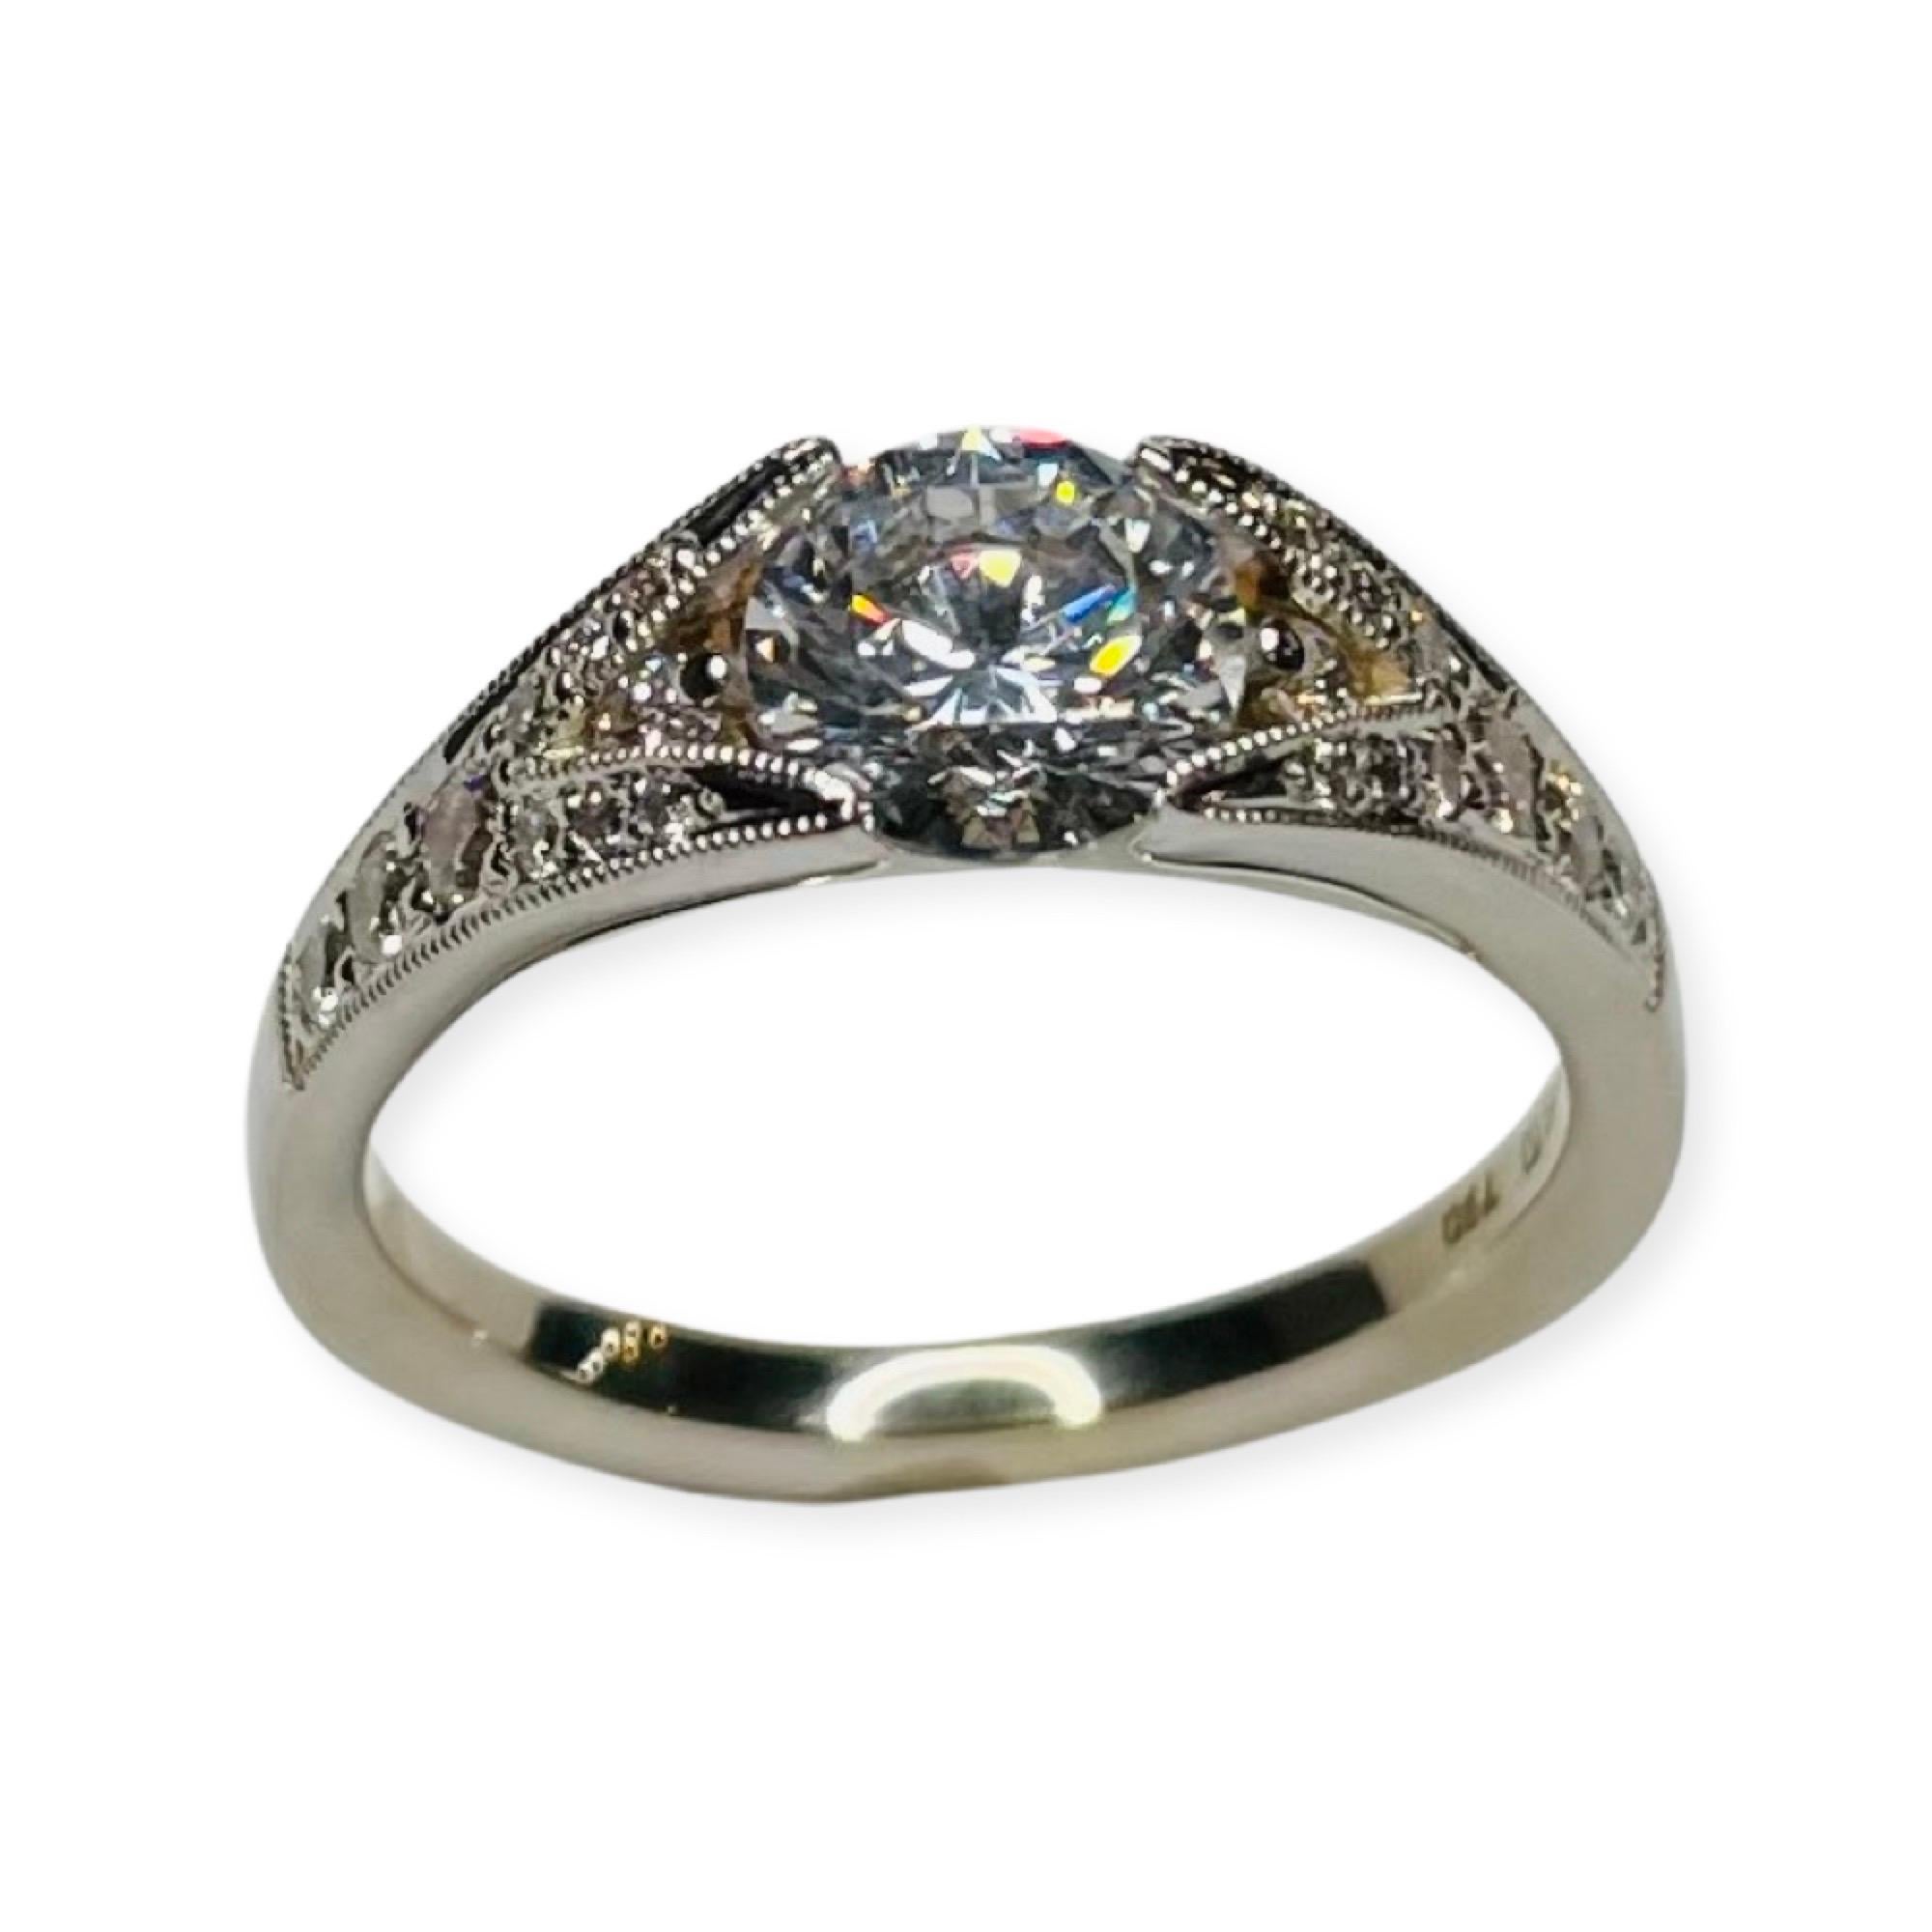 Brian Sholdt 18K White Gold Engagement Ring. It has a 1.0 carat cubic zirconia set in 4 prongs in the center. This CZ is equivalent in size to a 1.0 carat diamond. The CZ center can be replaced with a natural or lab created diamond, colored stone or